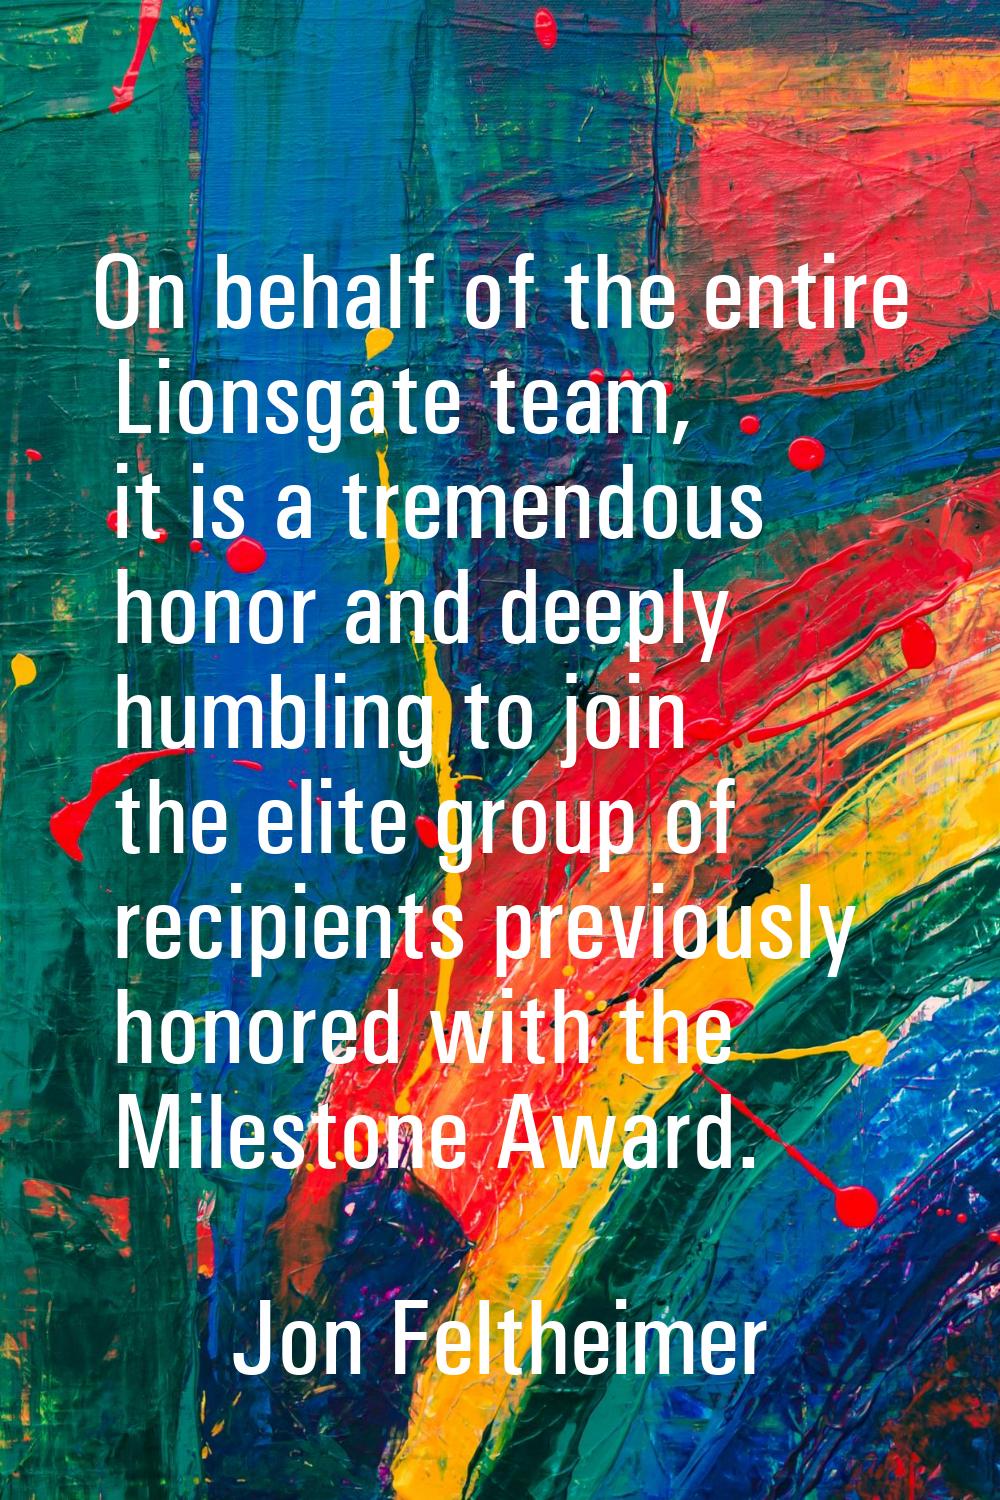 On behalf of the entire Lionsgate team, it is a tremendous honor and deeply humbling to join the el